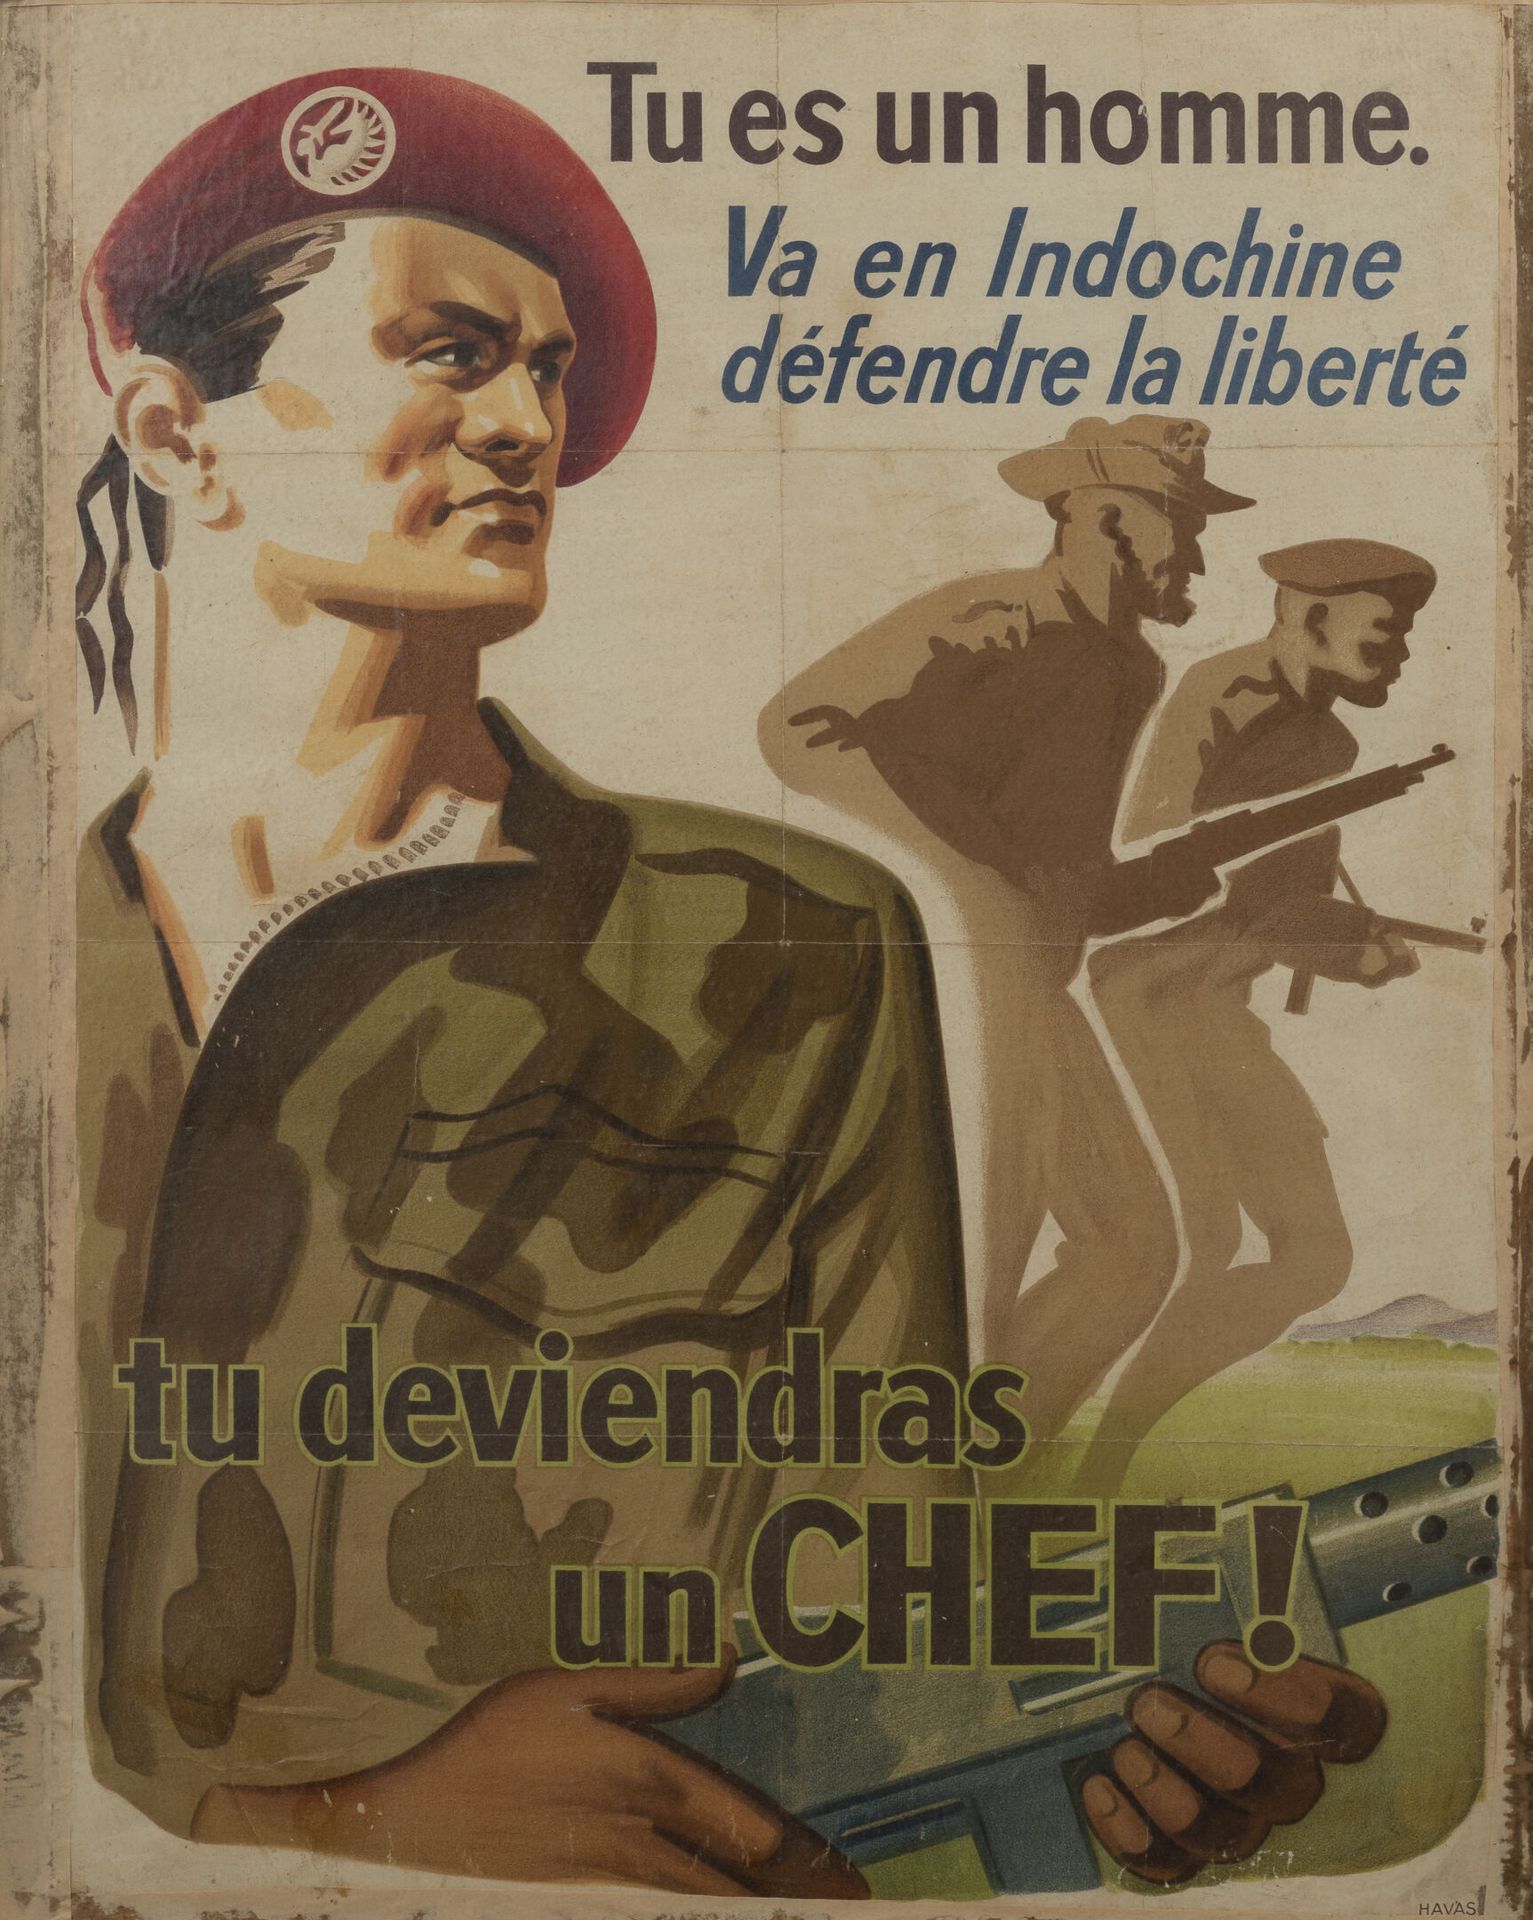 Null You are a Man goes to Indochina 

Recruitment poster for paratroopers in In&hellip;